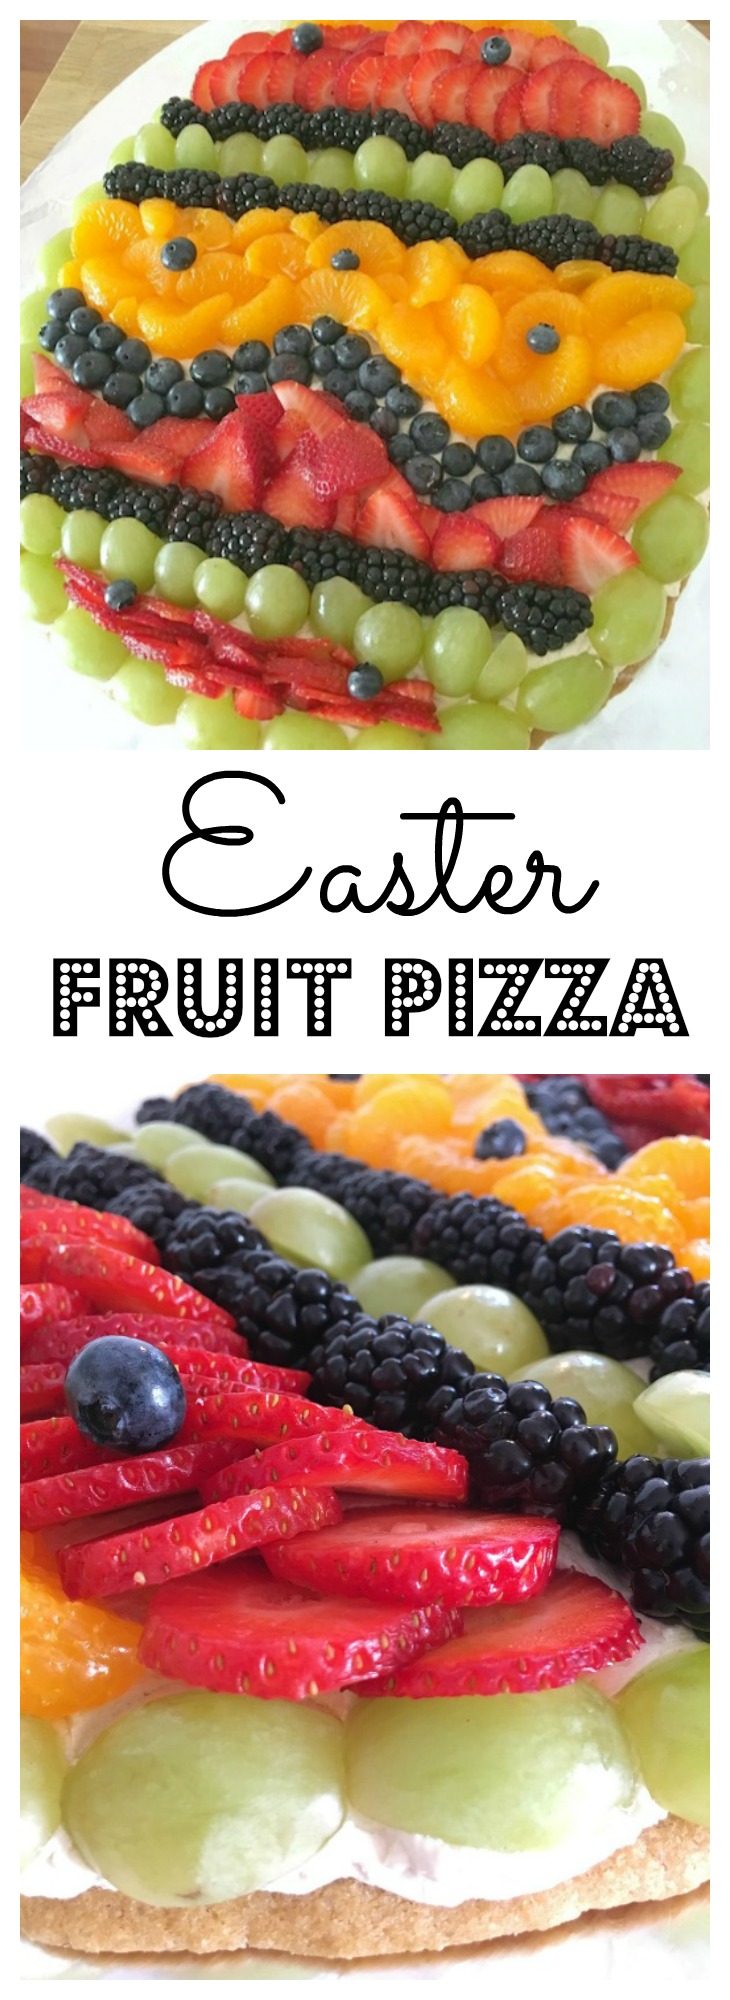 pin image pizza fruit easter cookie